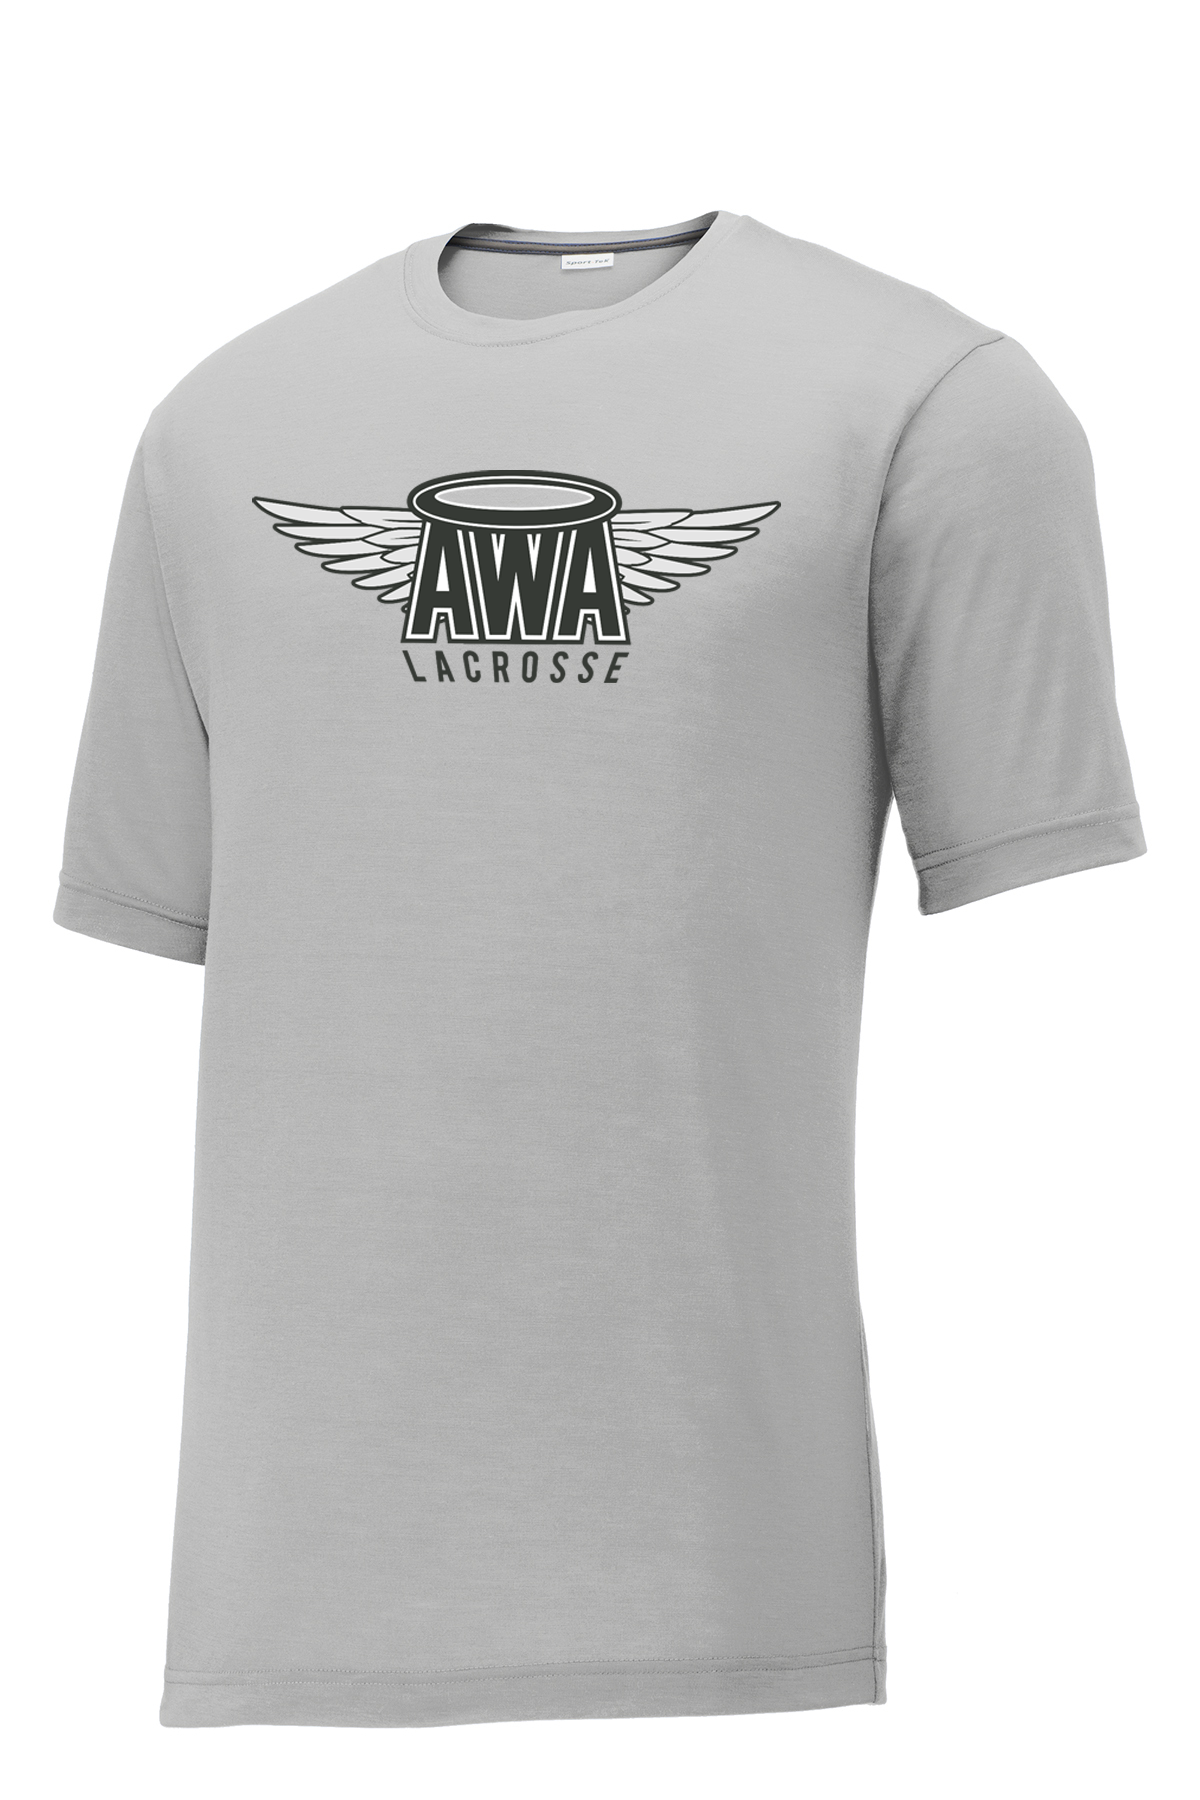 Angels With Attitude CottonTouch Performance T-Shirt